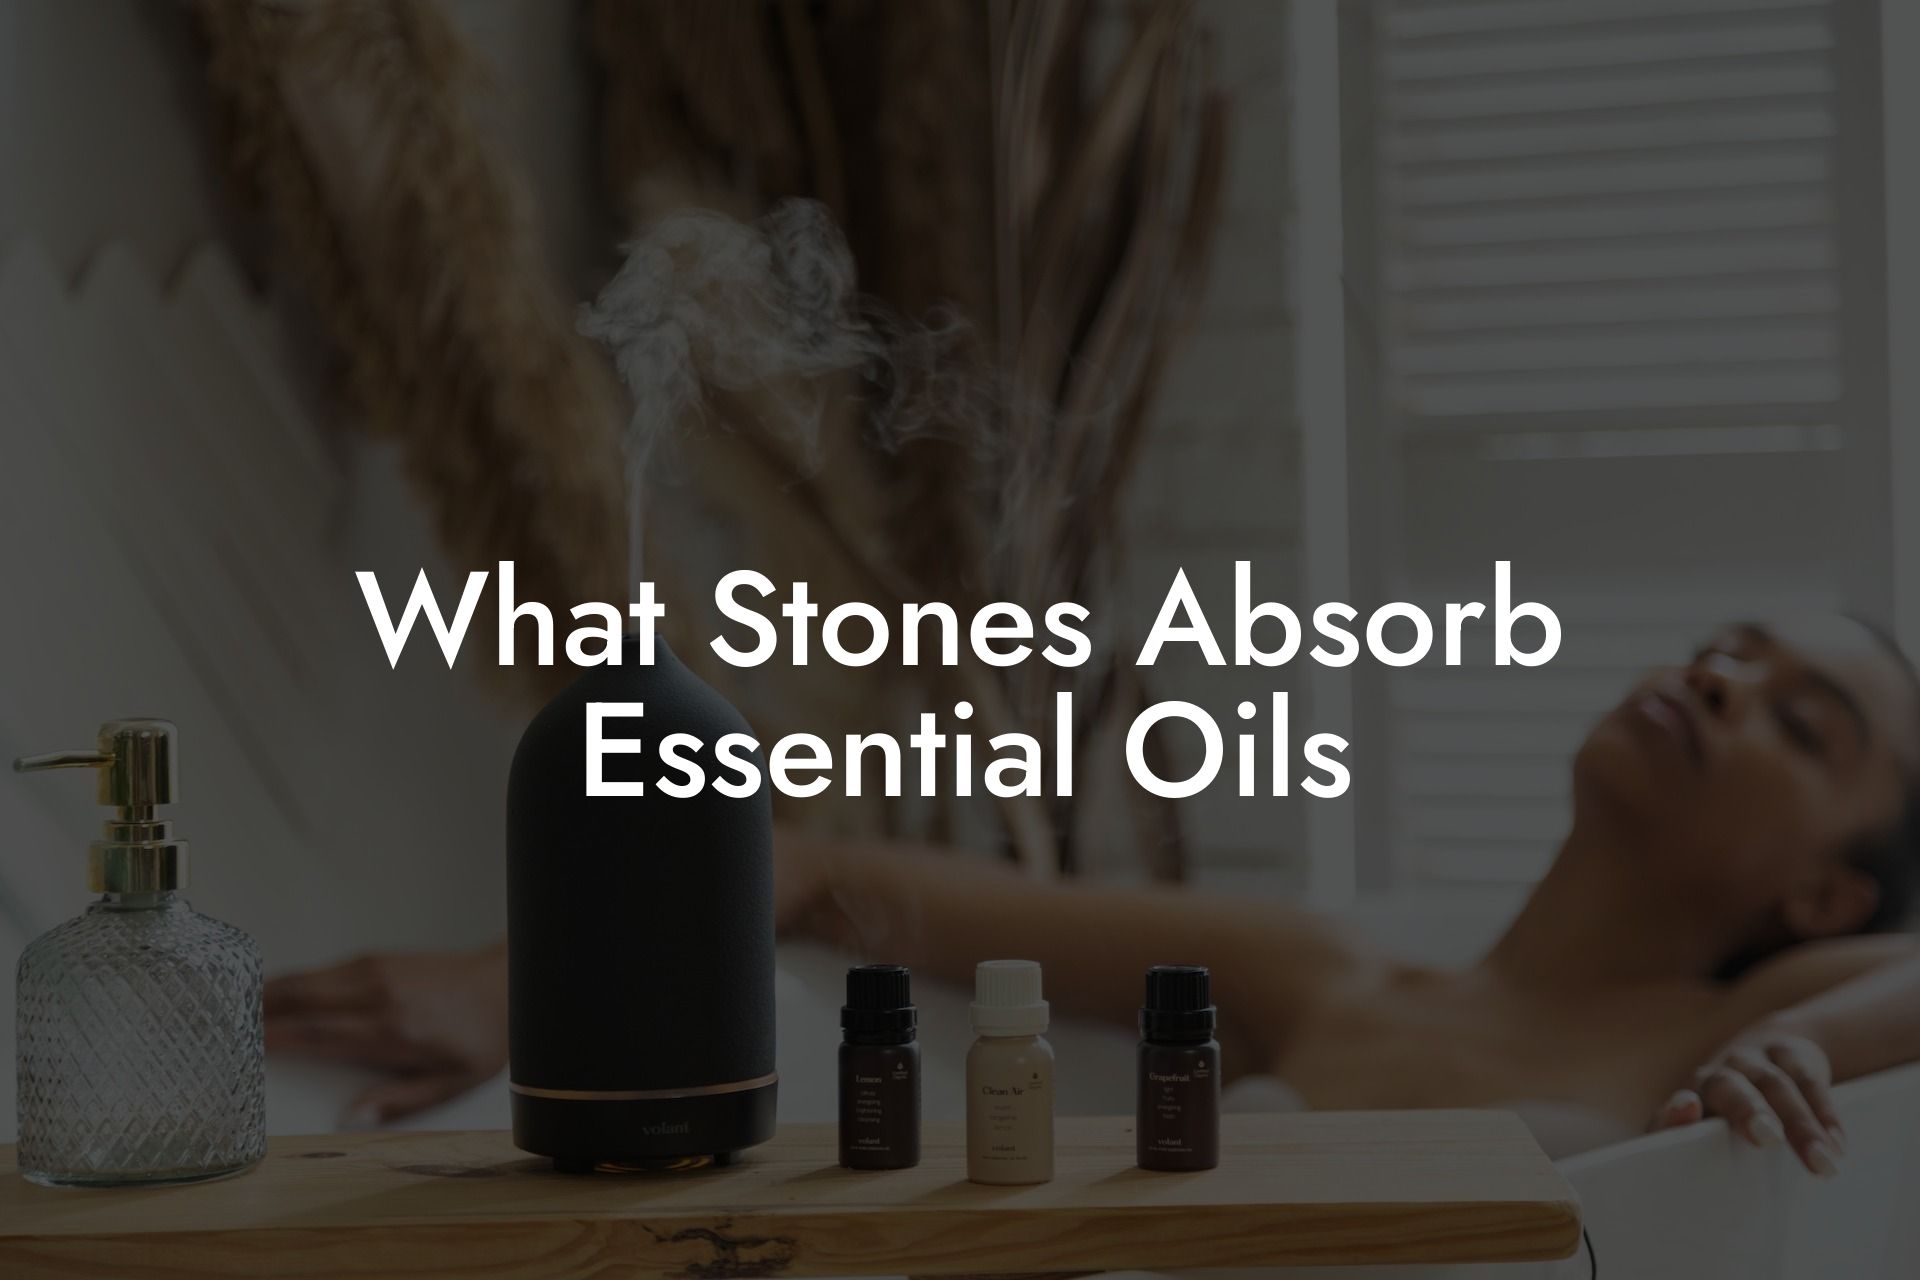 What Stones Absorb Essential Oils